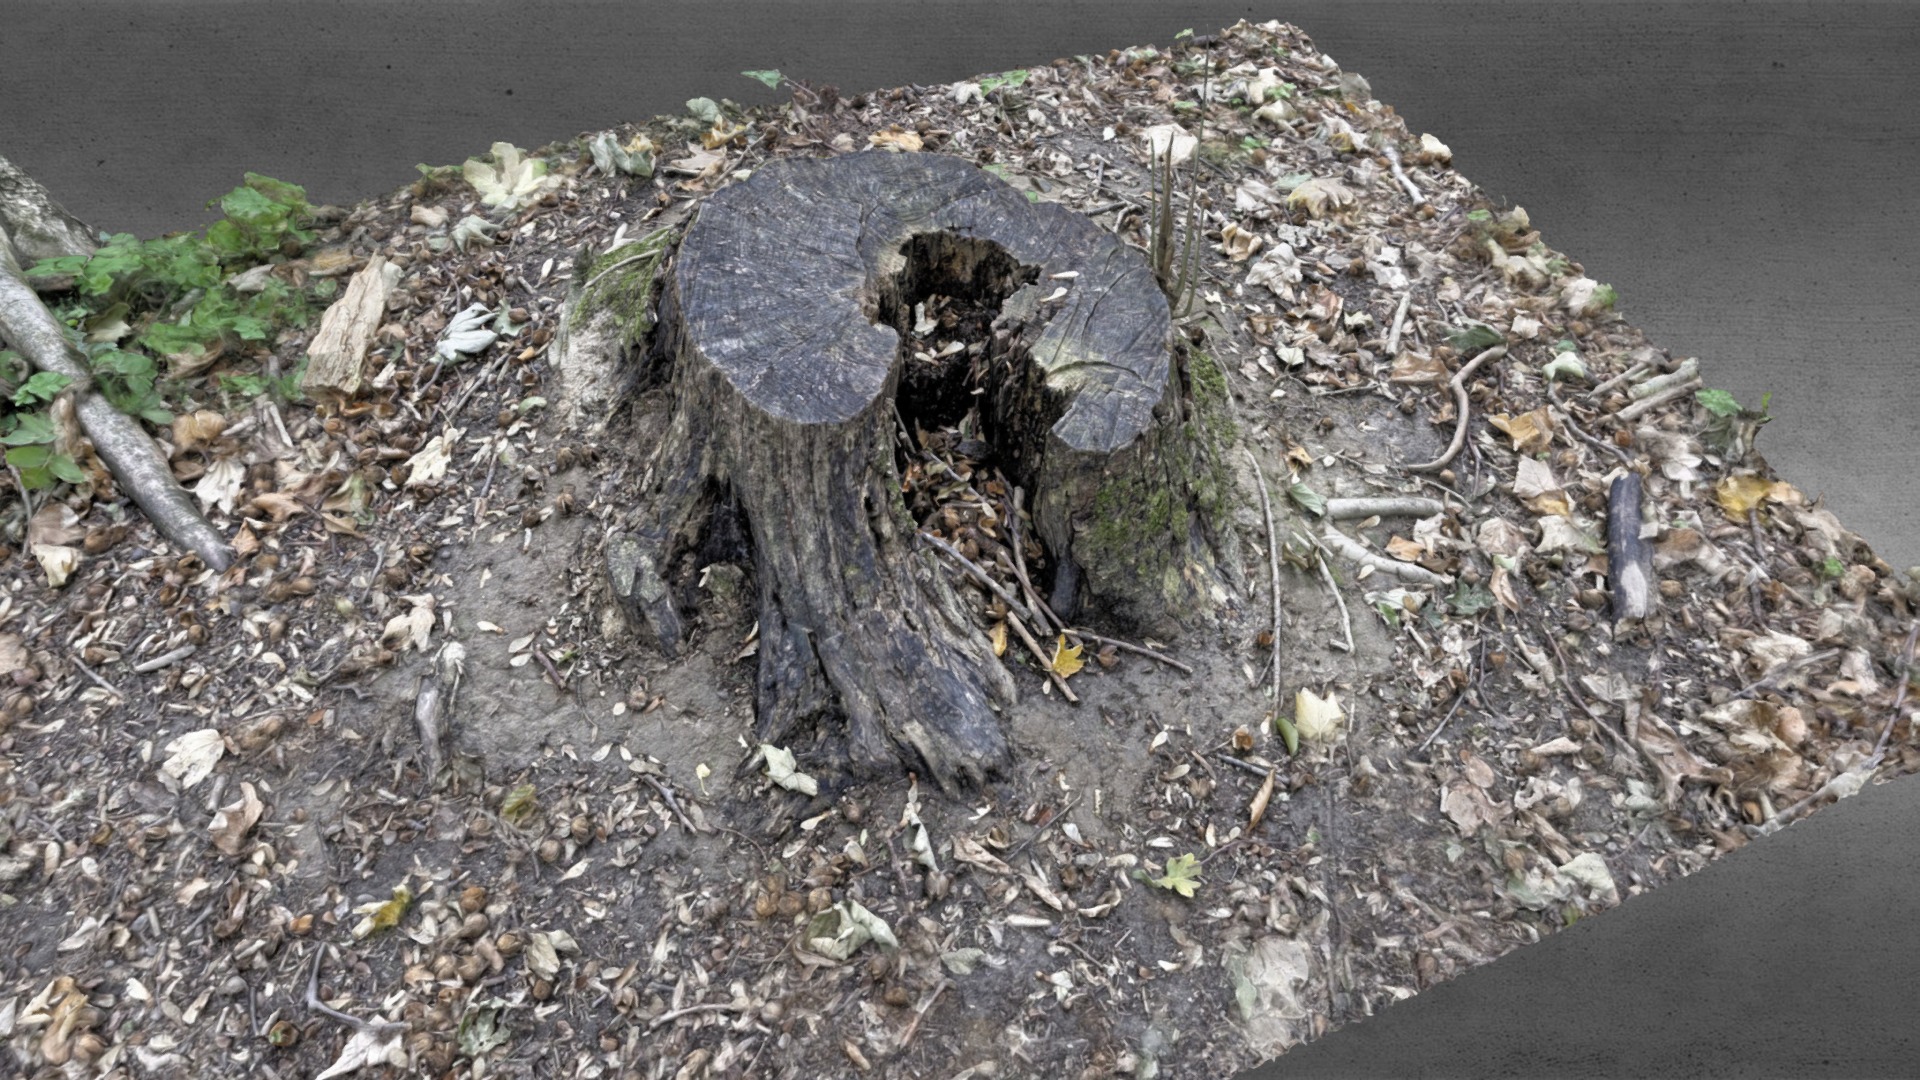 3D model tree stump photogrammetry - This is a 3D model of the tree stump photogrammetry. The 3D model is about a large turtle on the ground.